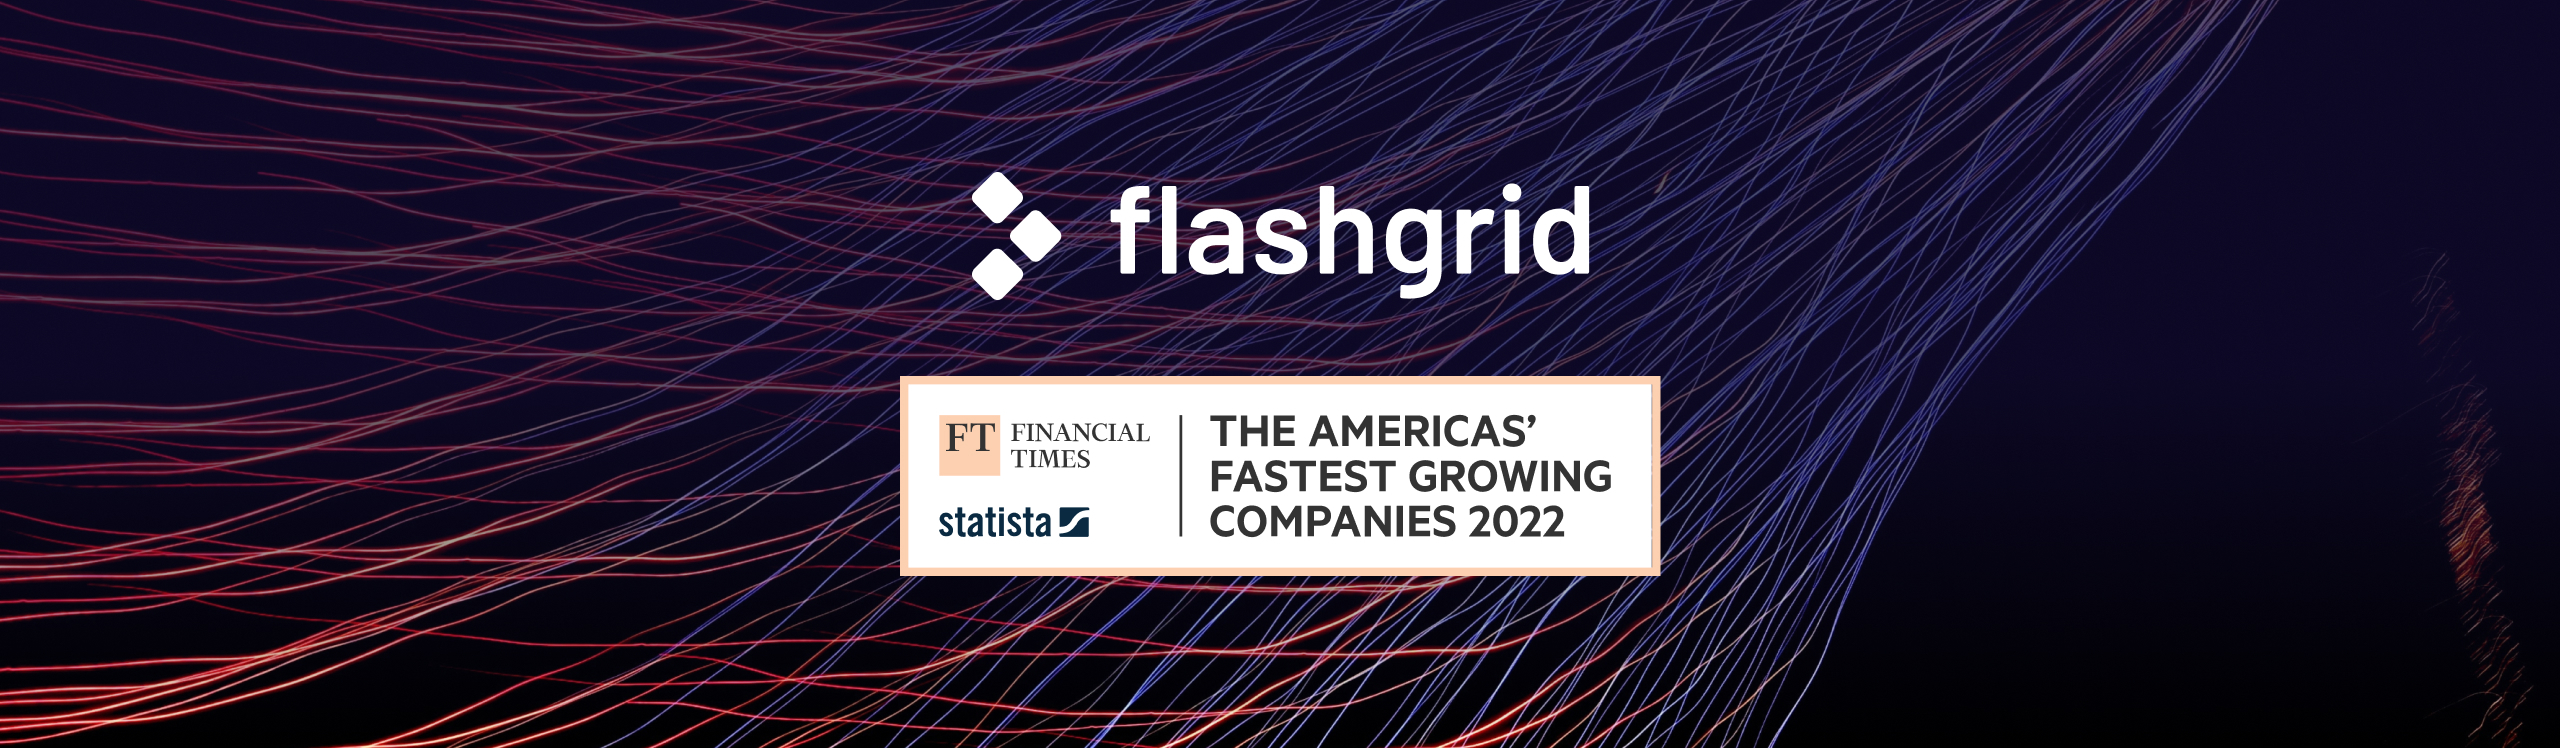 FlashGrid was recognized as the fastest-growing company in 2022